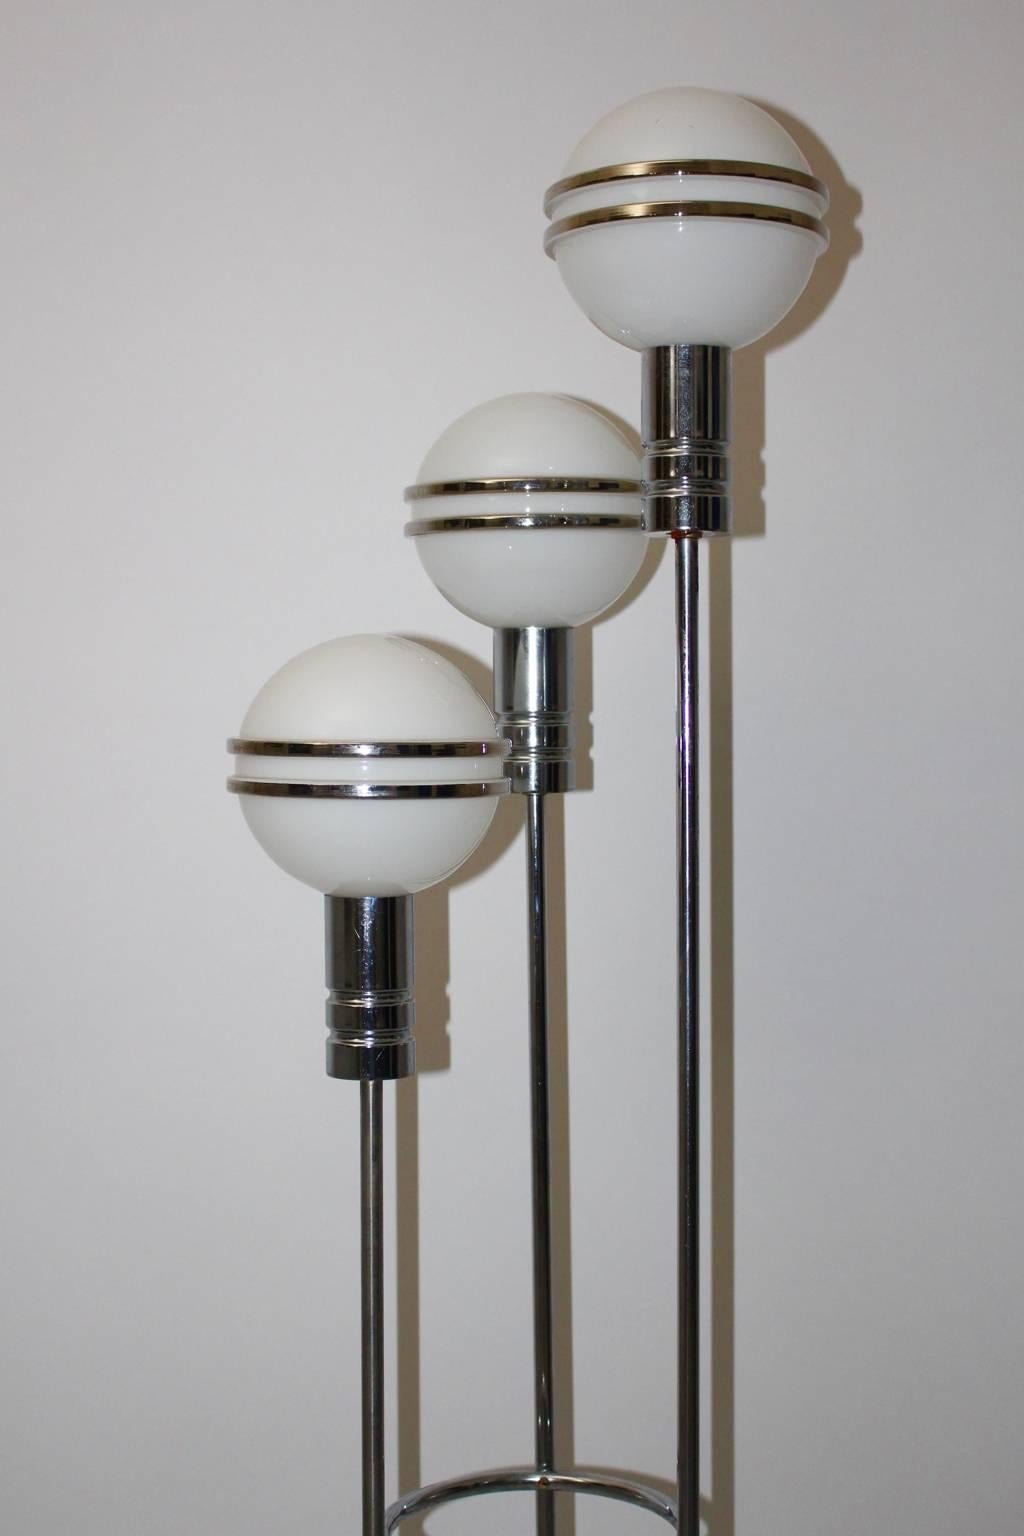 Art Deco chrome plated steel streamline Floor Lamp with three white milk-glass globes with socket E 14 and each globe shows decoration with two silver linings.
All measures are approximate.